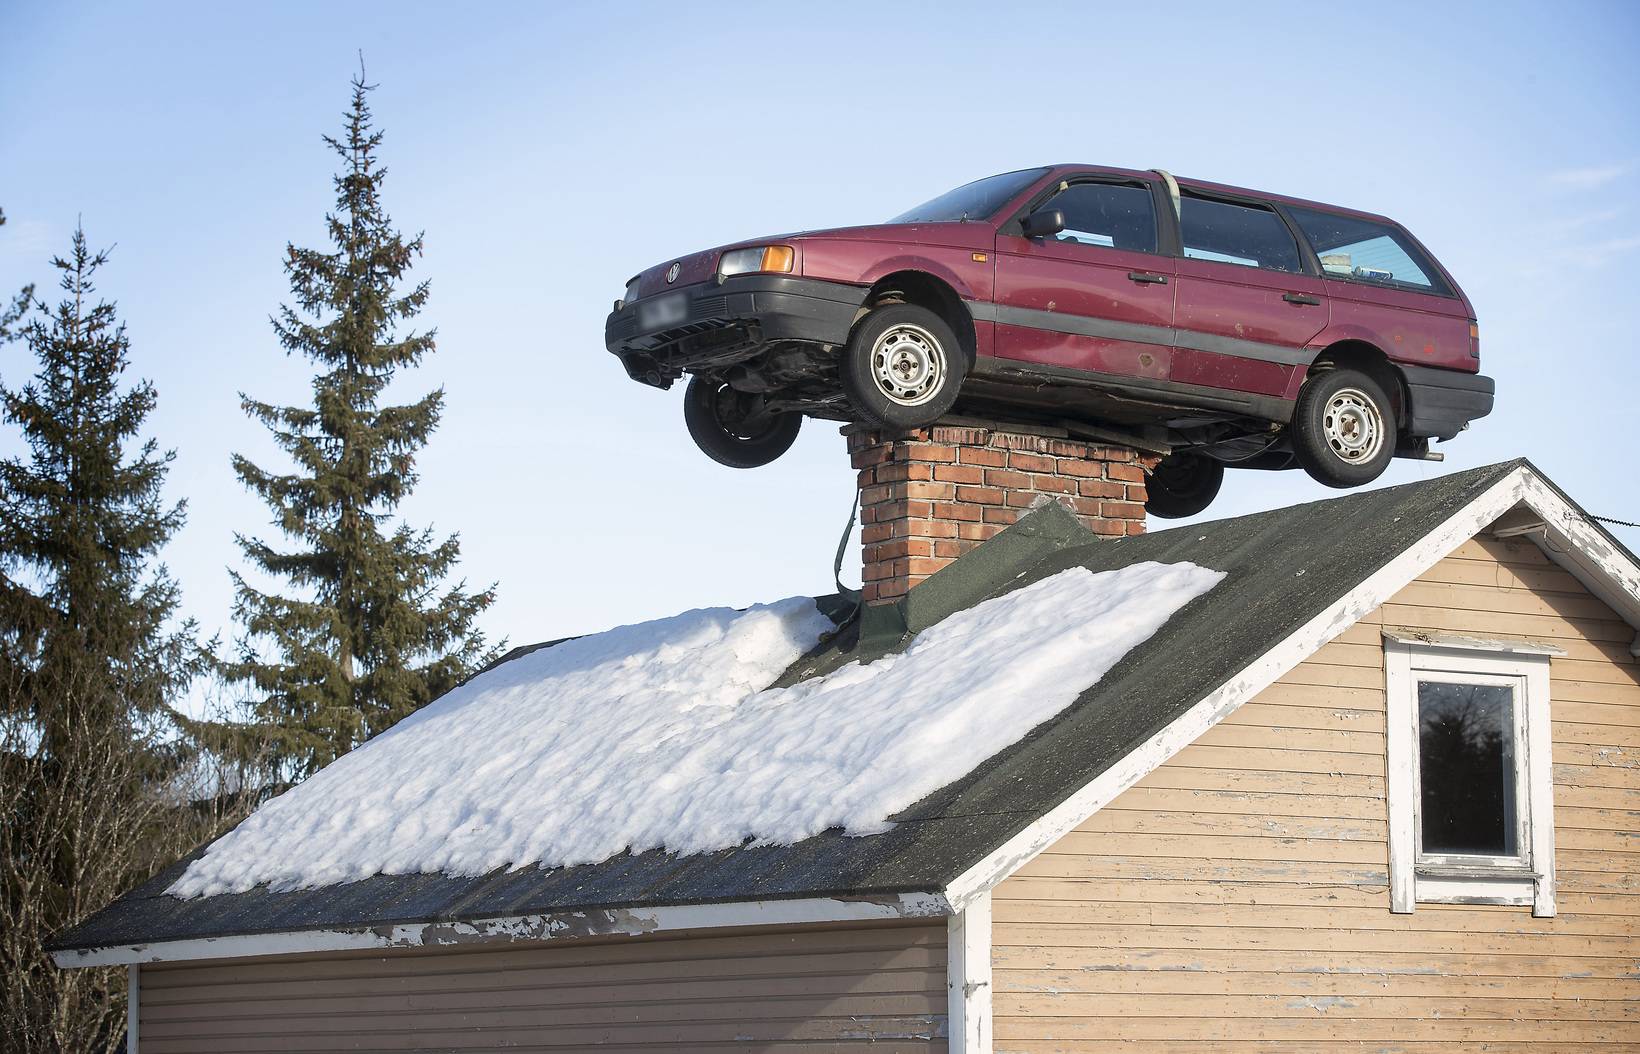 Car parked on rooftop